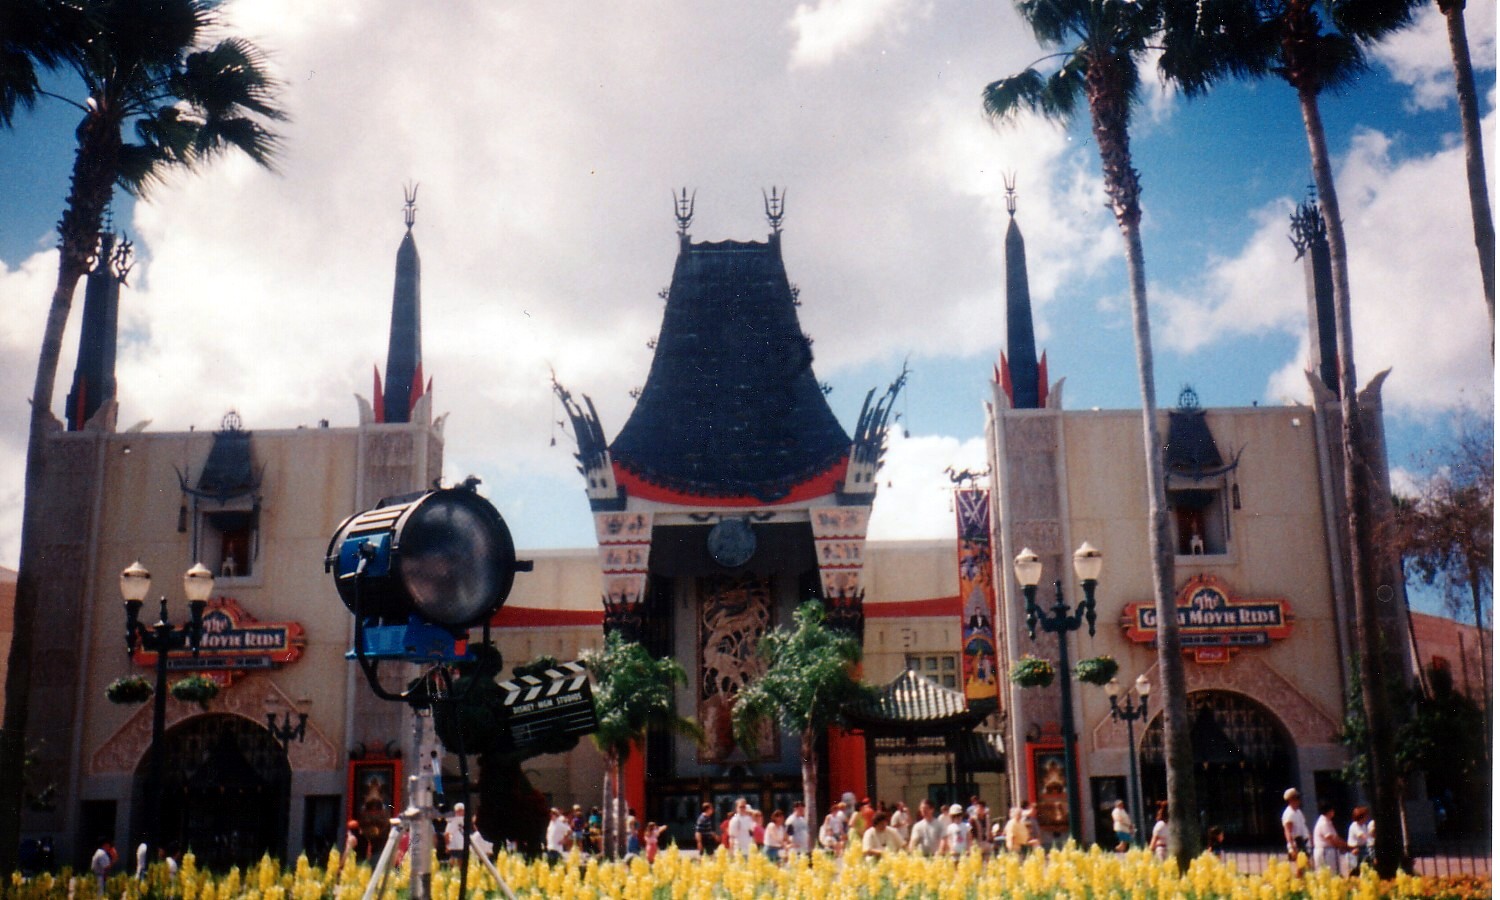 The Great Movie Ride 1989